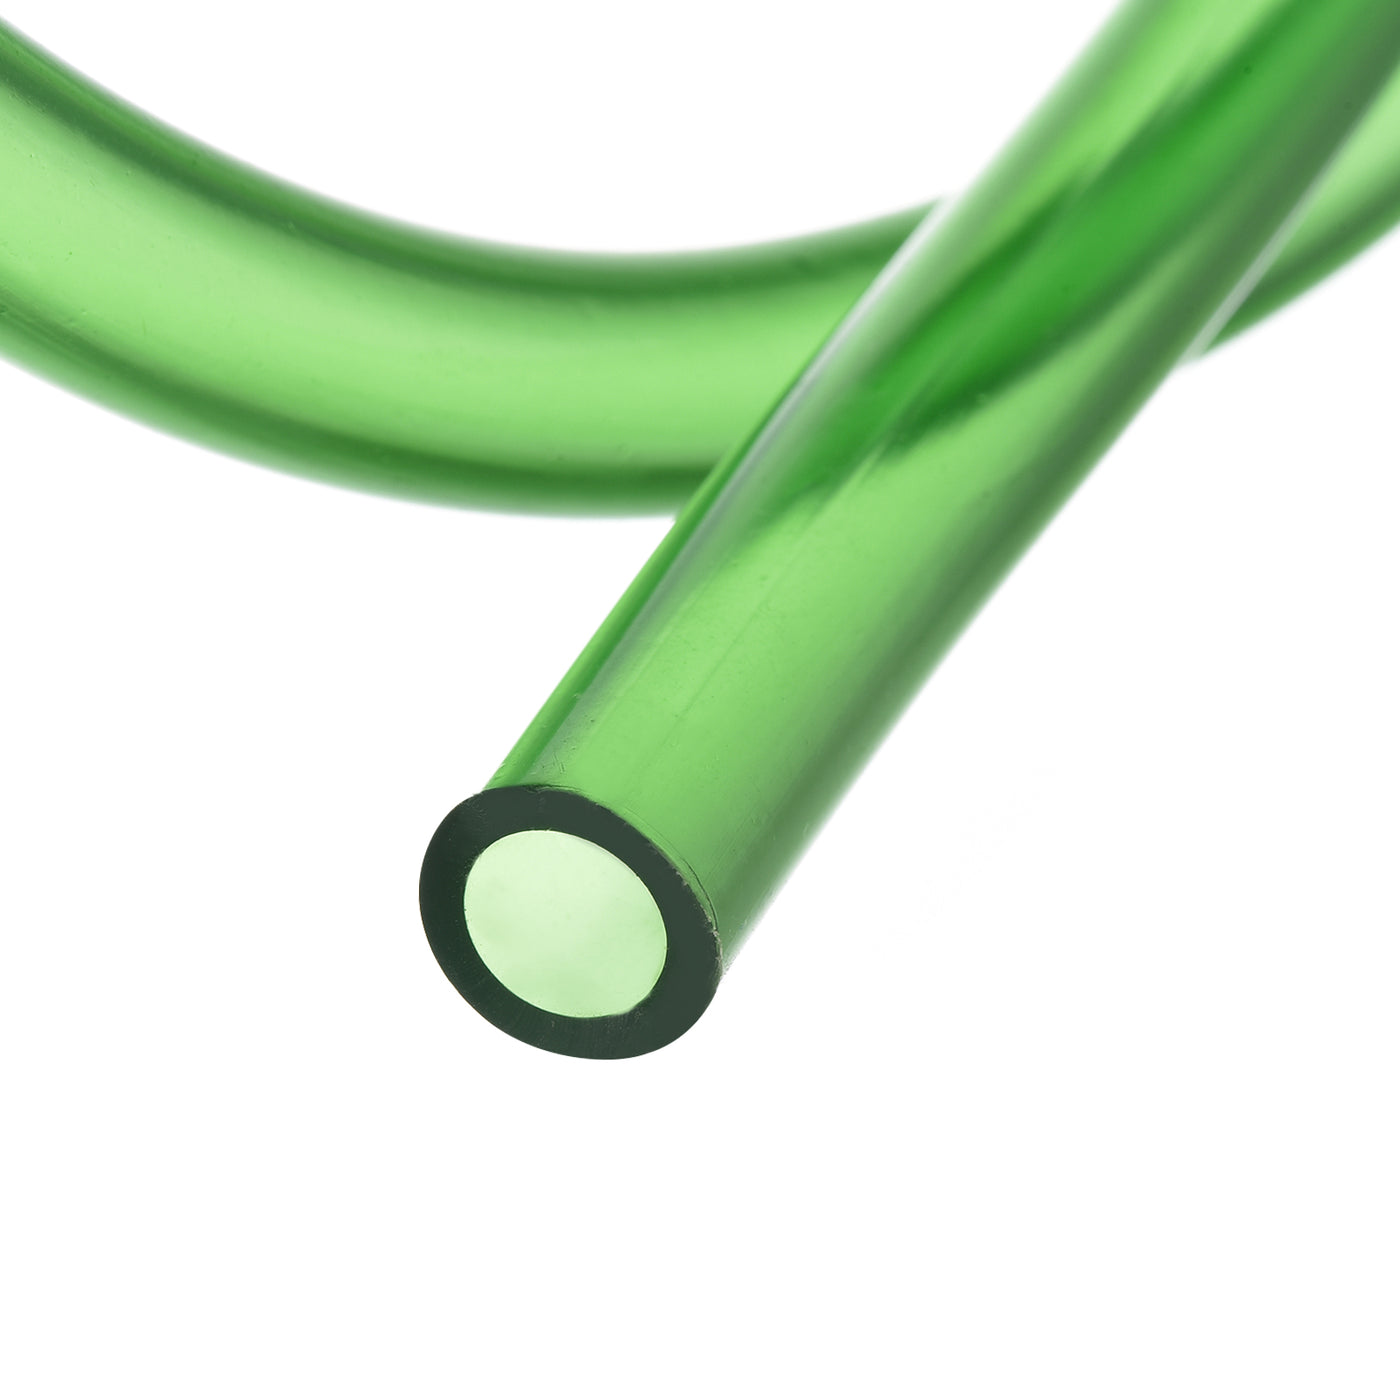 uxcell Uxcell PVC Tubing 5/16" ID, 15/32" OD 4Pcs 3.28 Ft for Transfer, Green